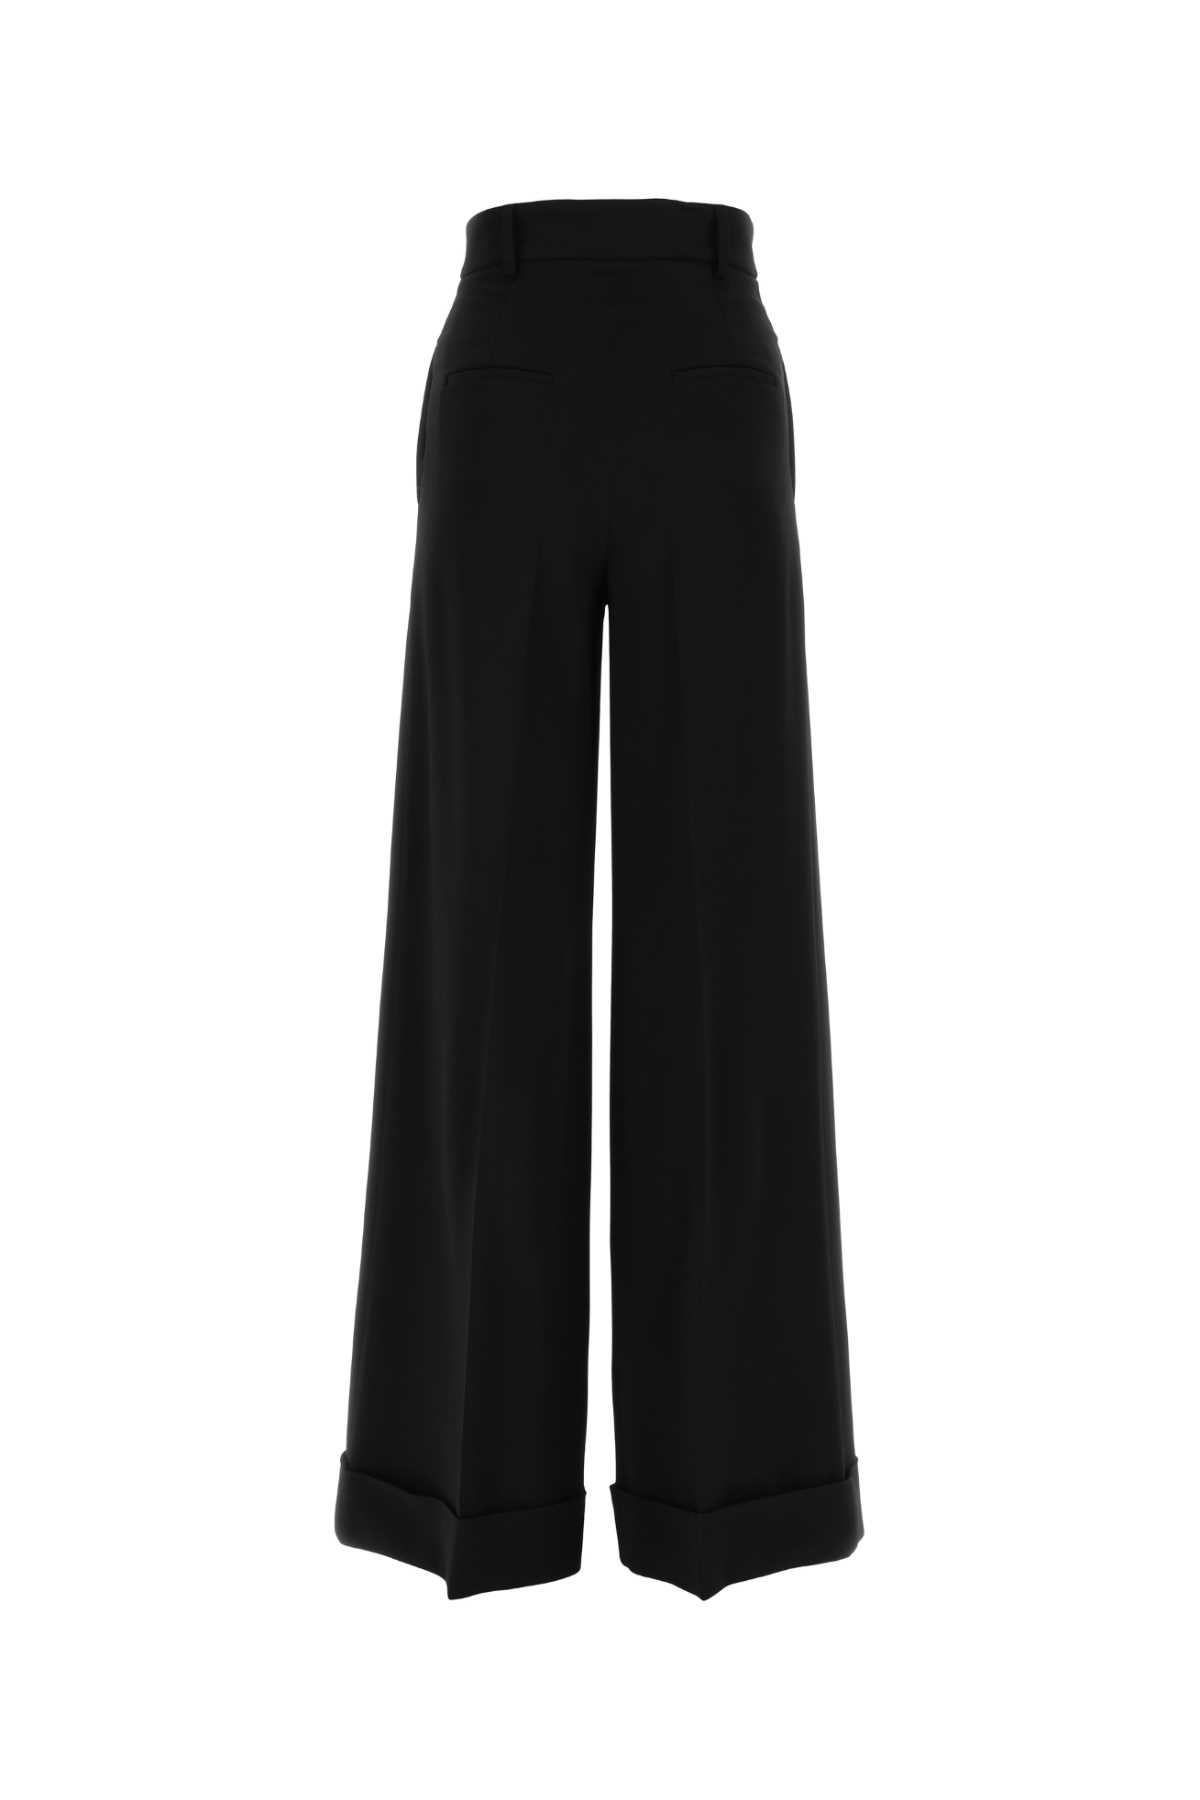 Moschino Black Crepe Wide-leg Pant In 0555